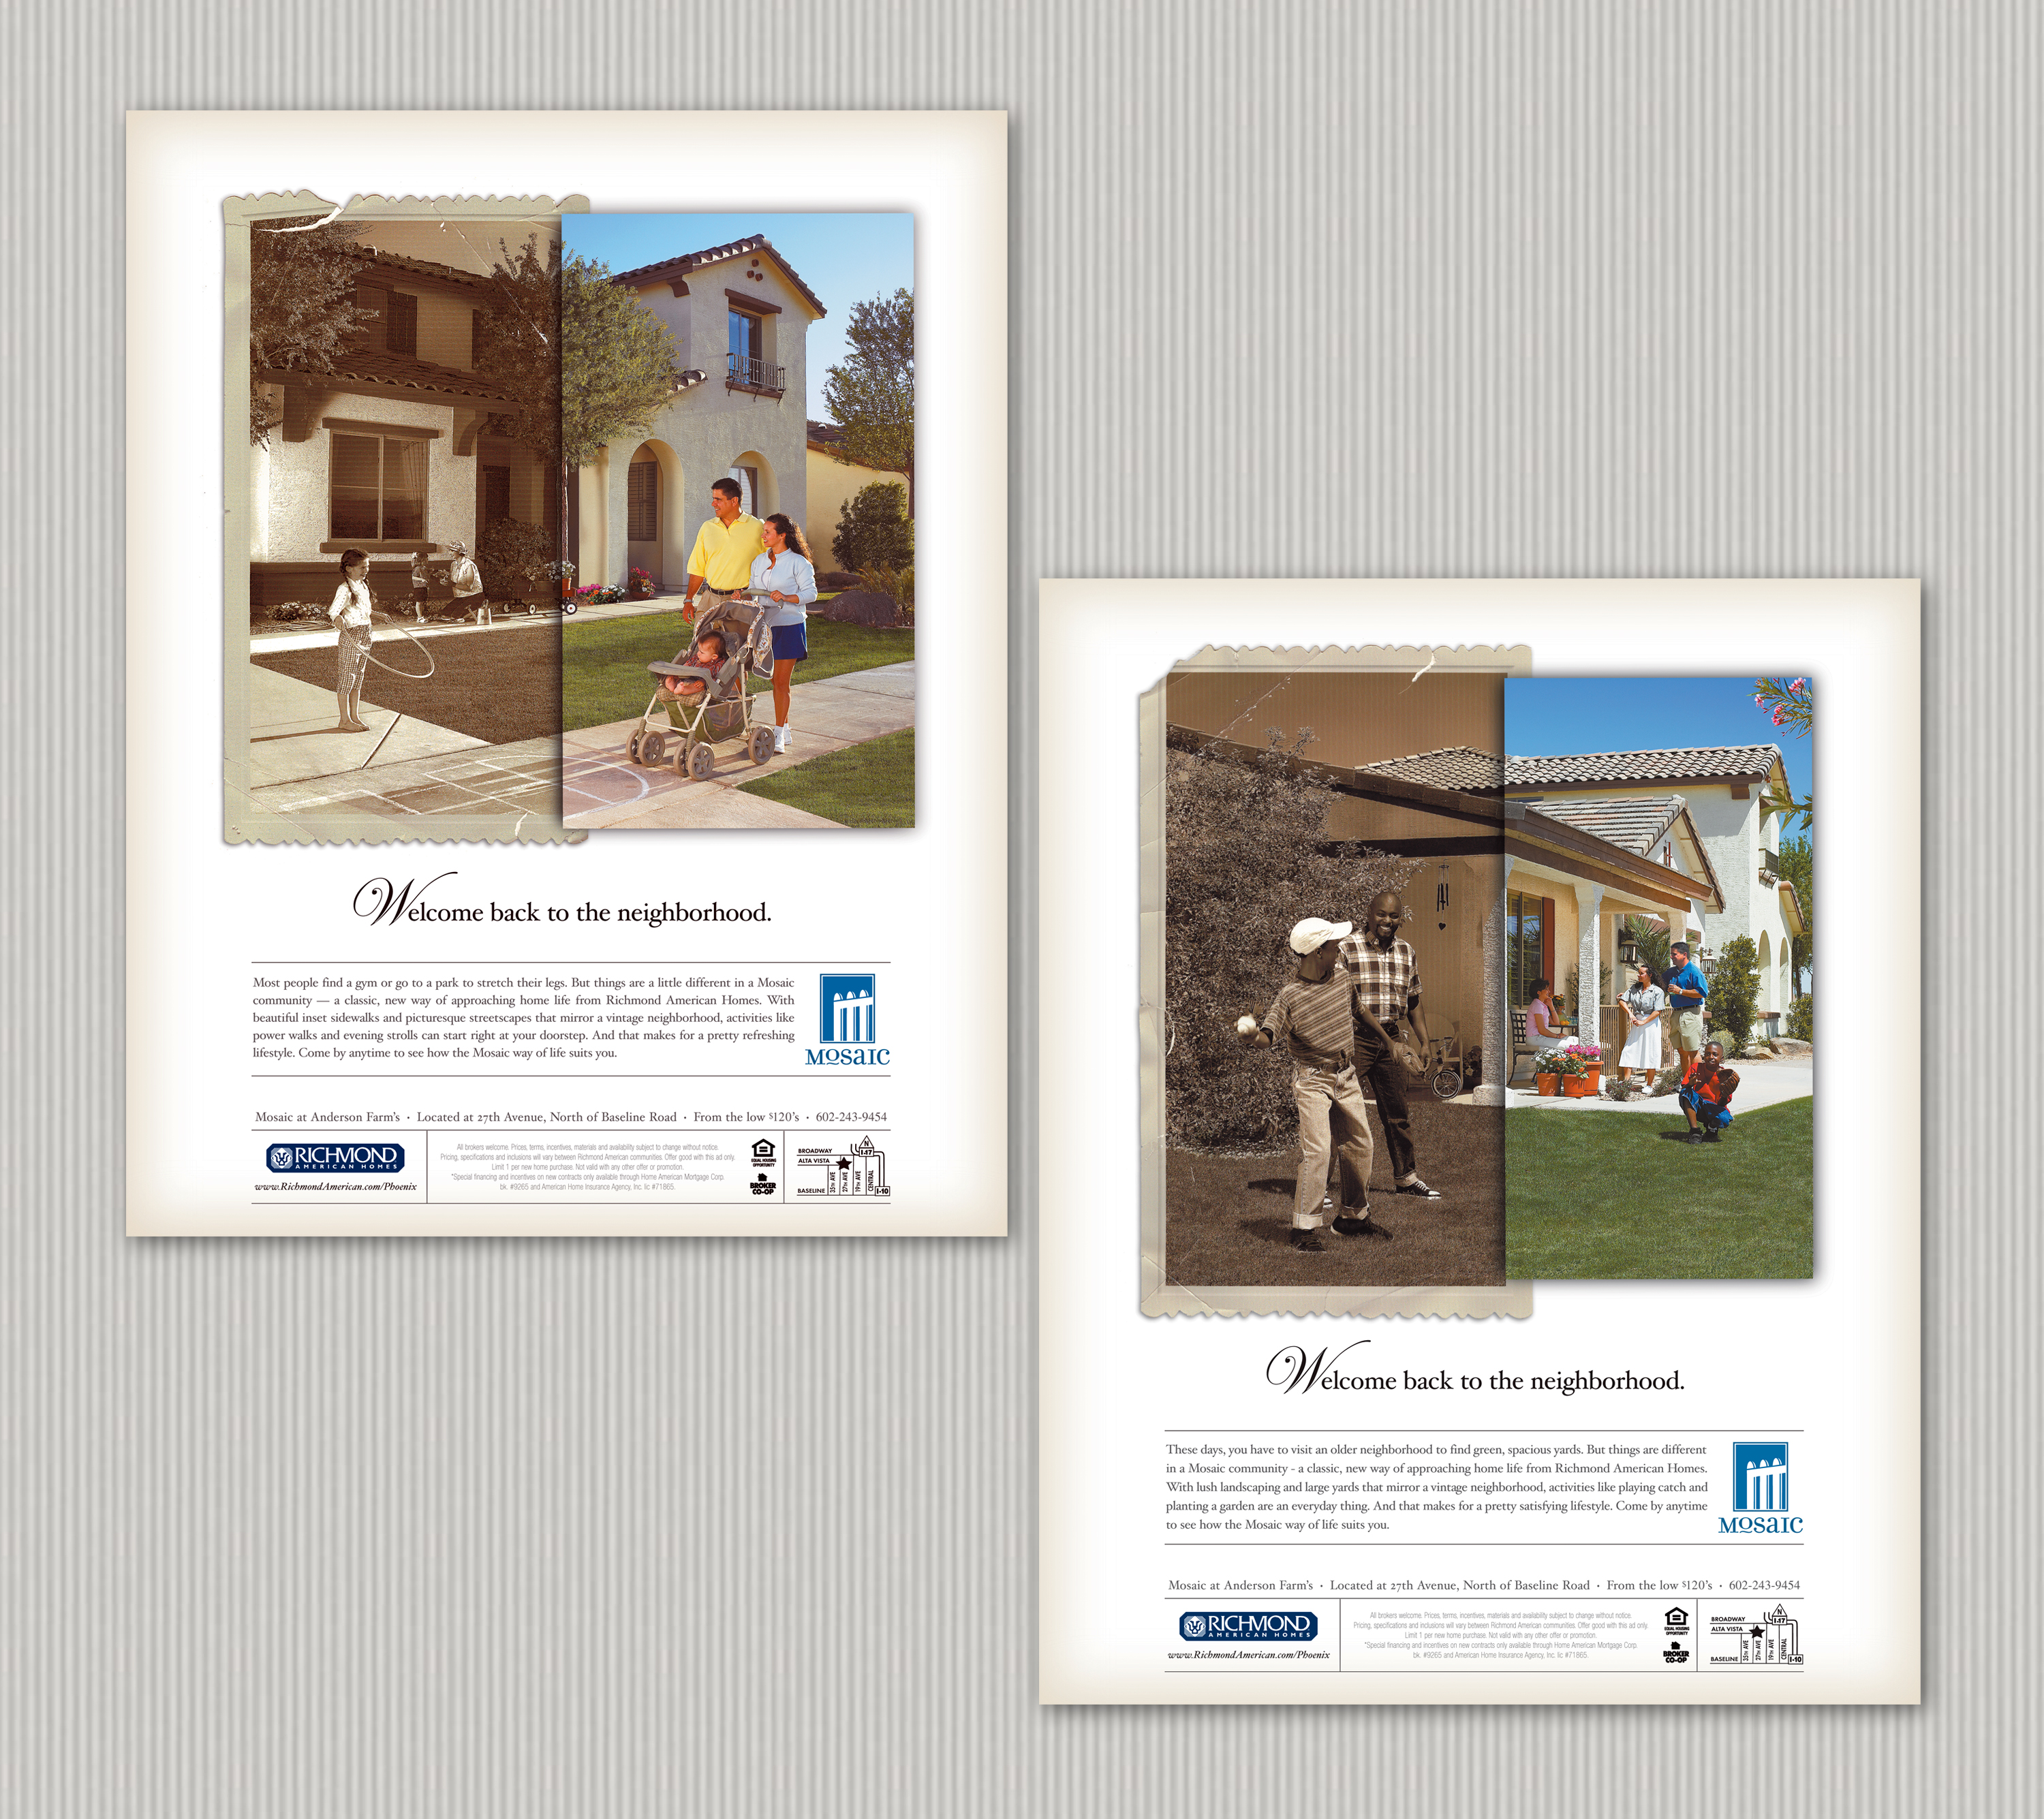 Print campaign, ad #2 for Mosaic at Anderson Farm